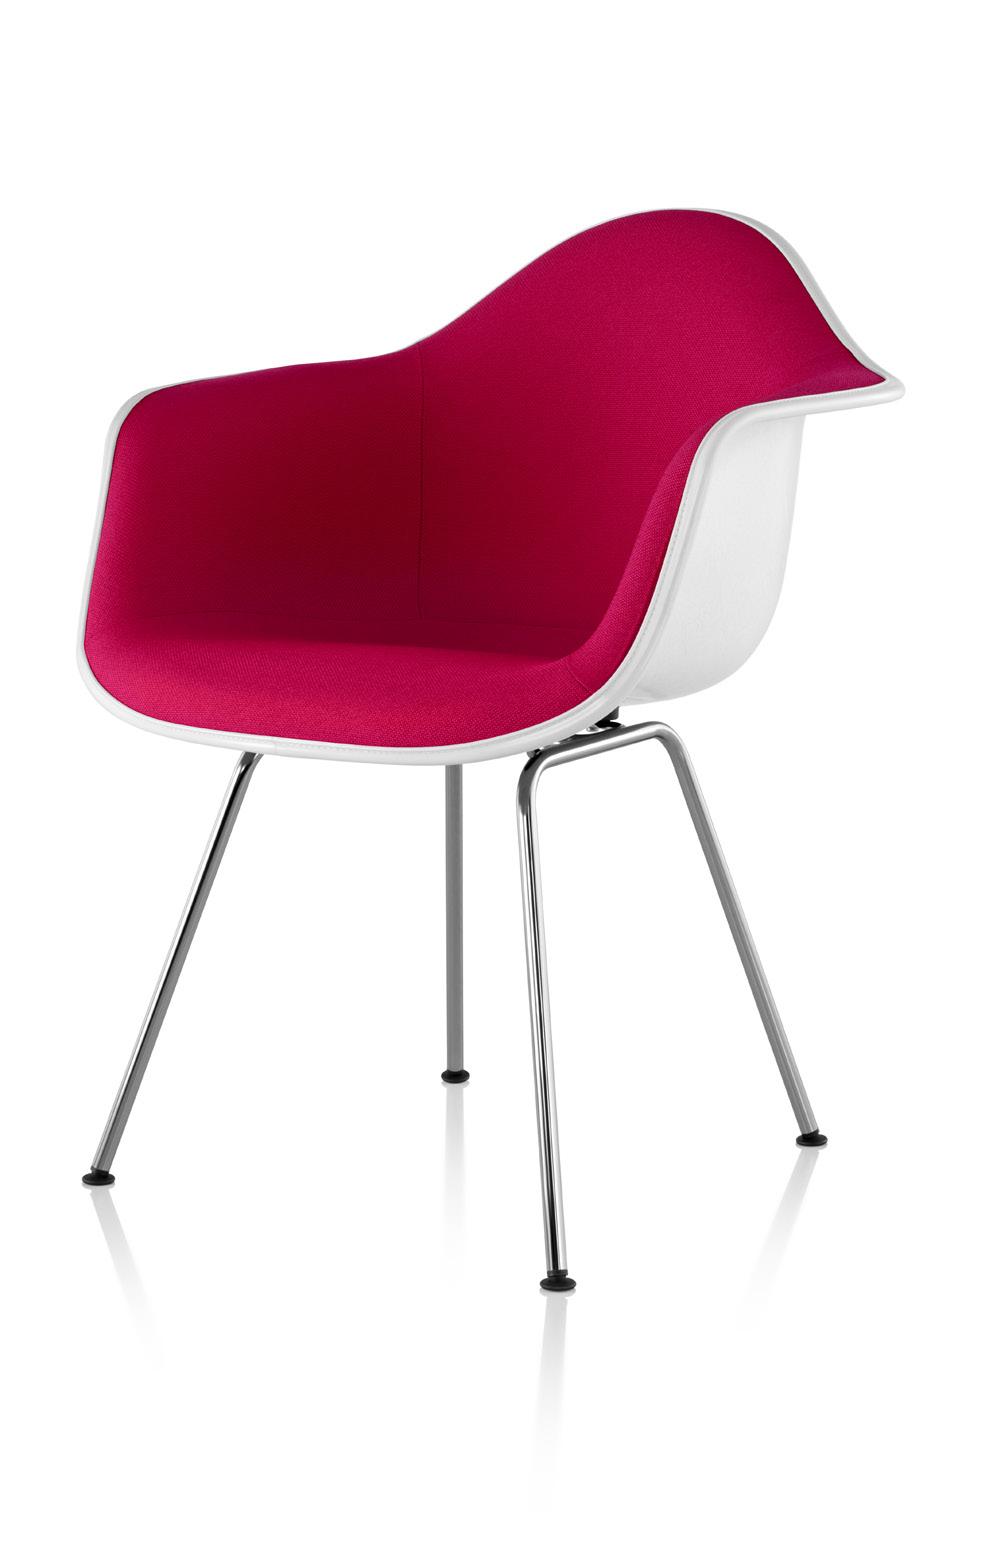 Eames Upholstered Molded Plastic Armchair 4-Leg Base The sleek lines and organic shape of this enduring chair by Charles and Ray Eames epitomize their mantra of the best for